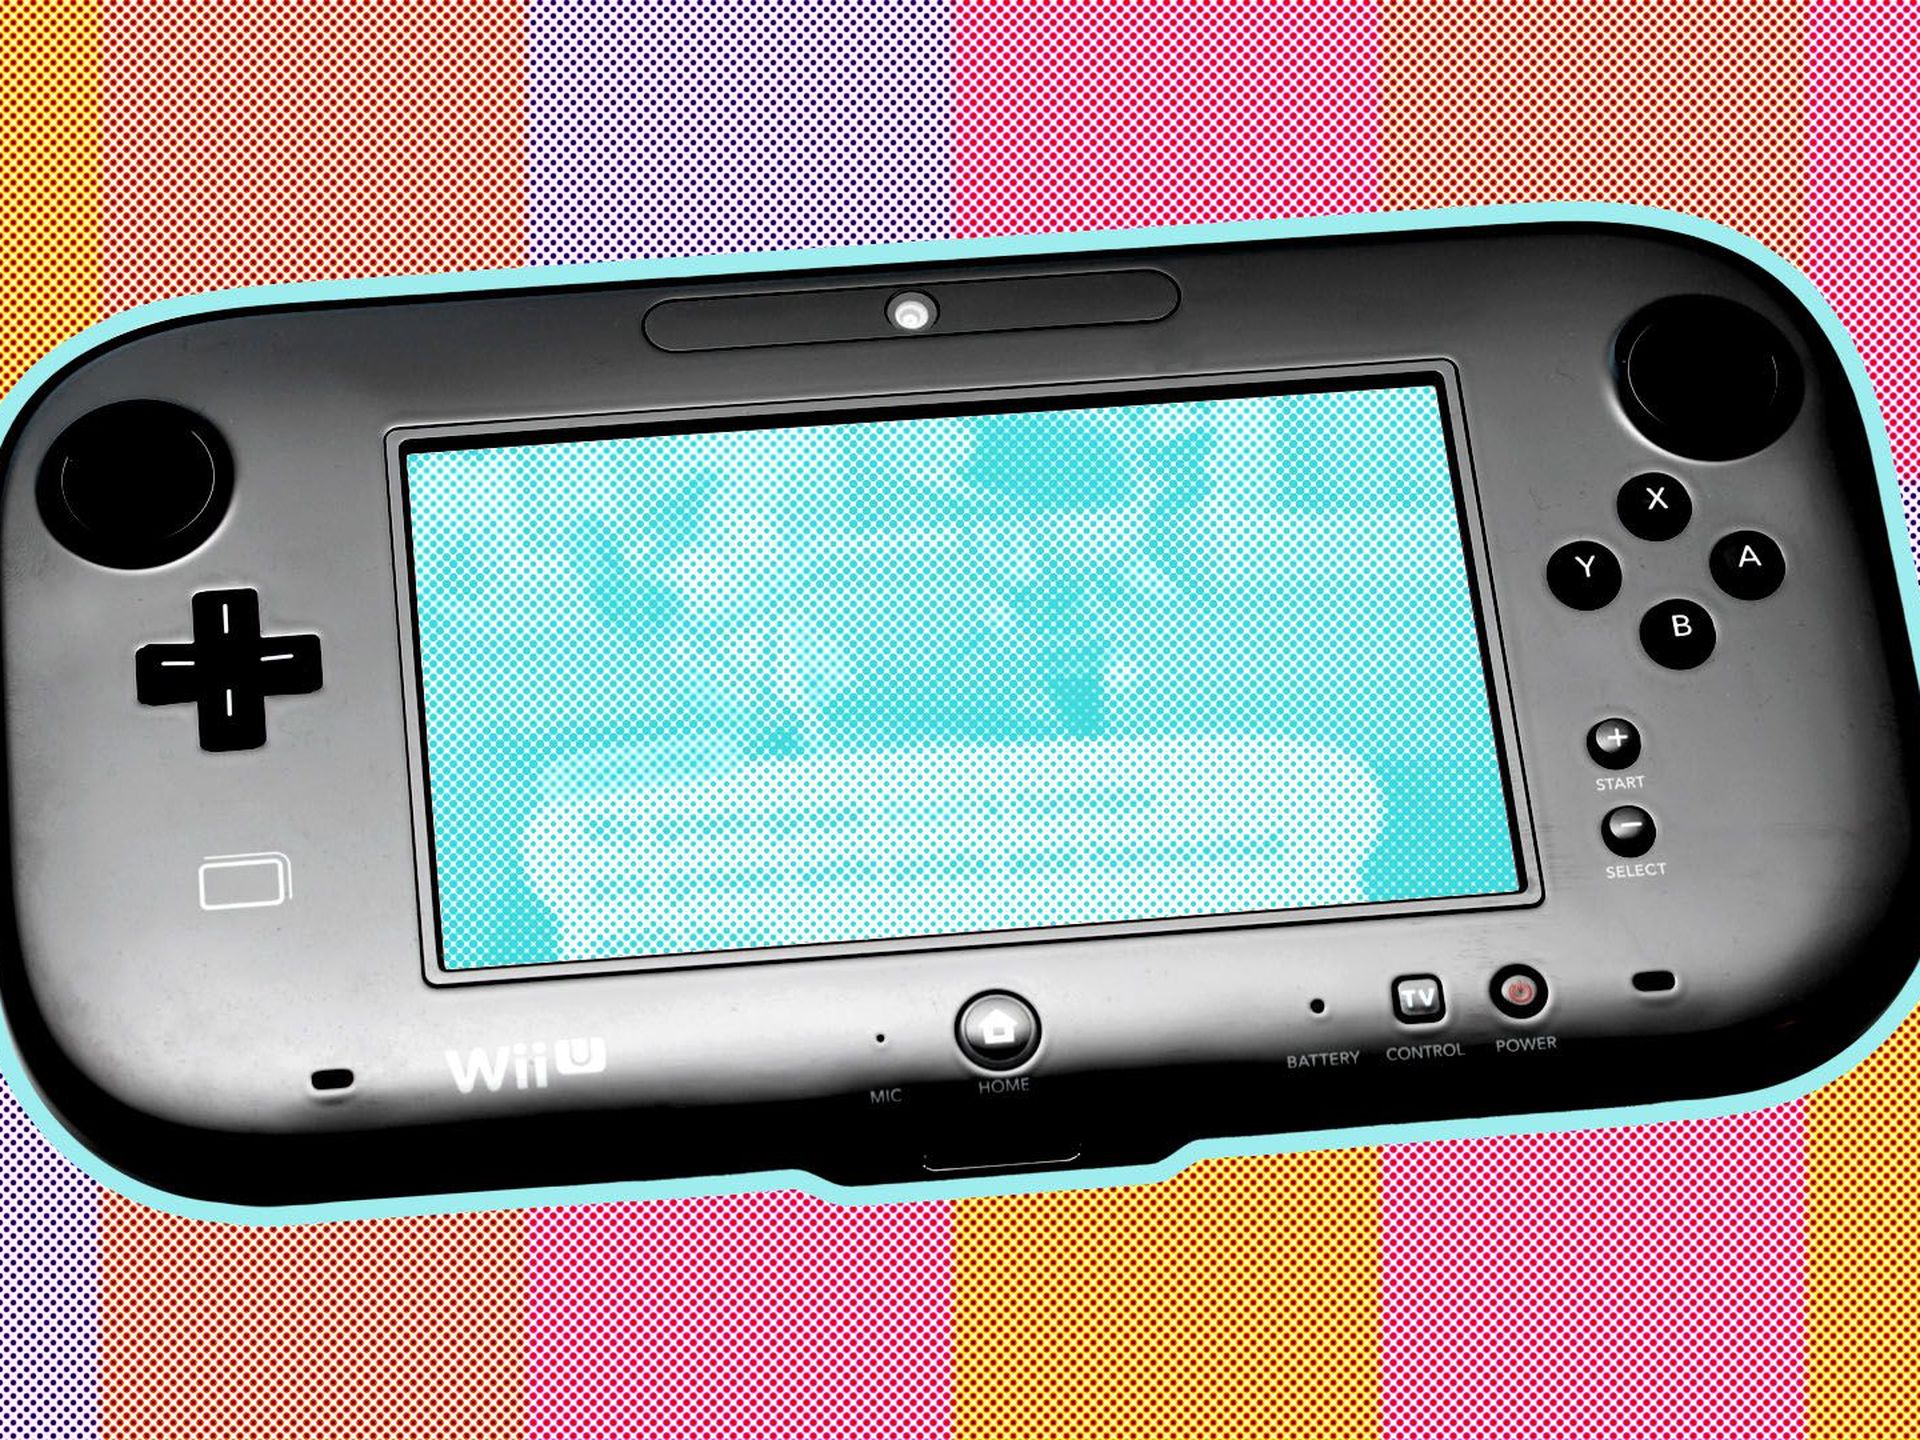 Nintendo Switch's Success Started With the Wii U